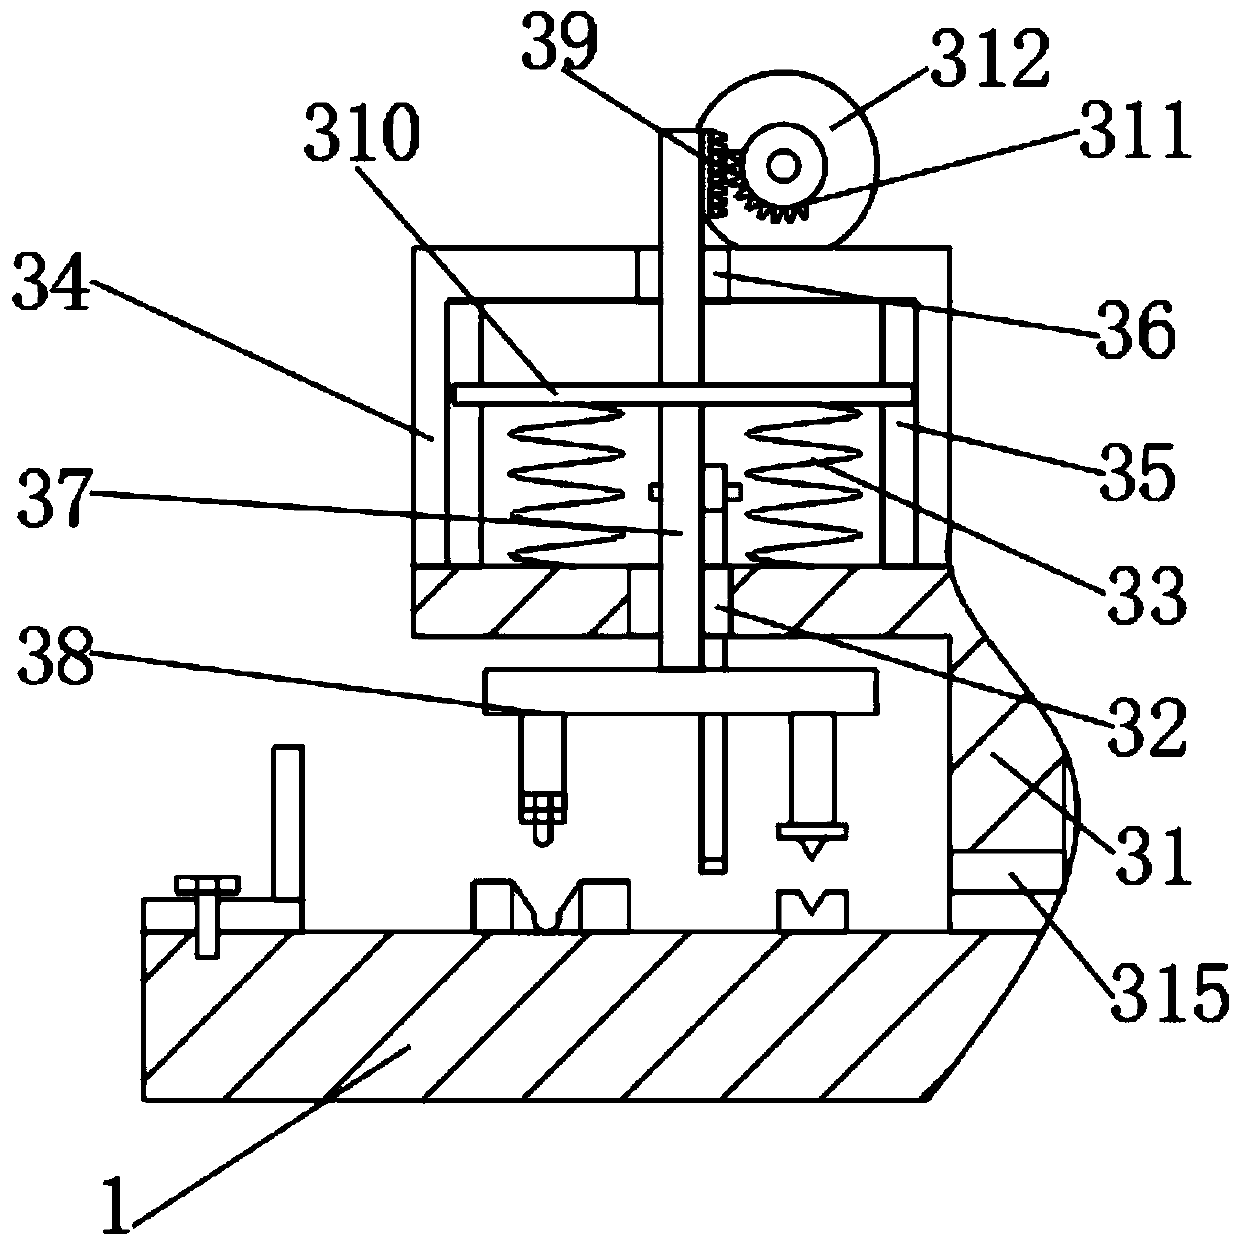 Plate bending device for diesel generator production